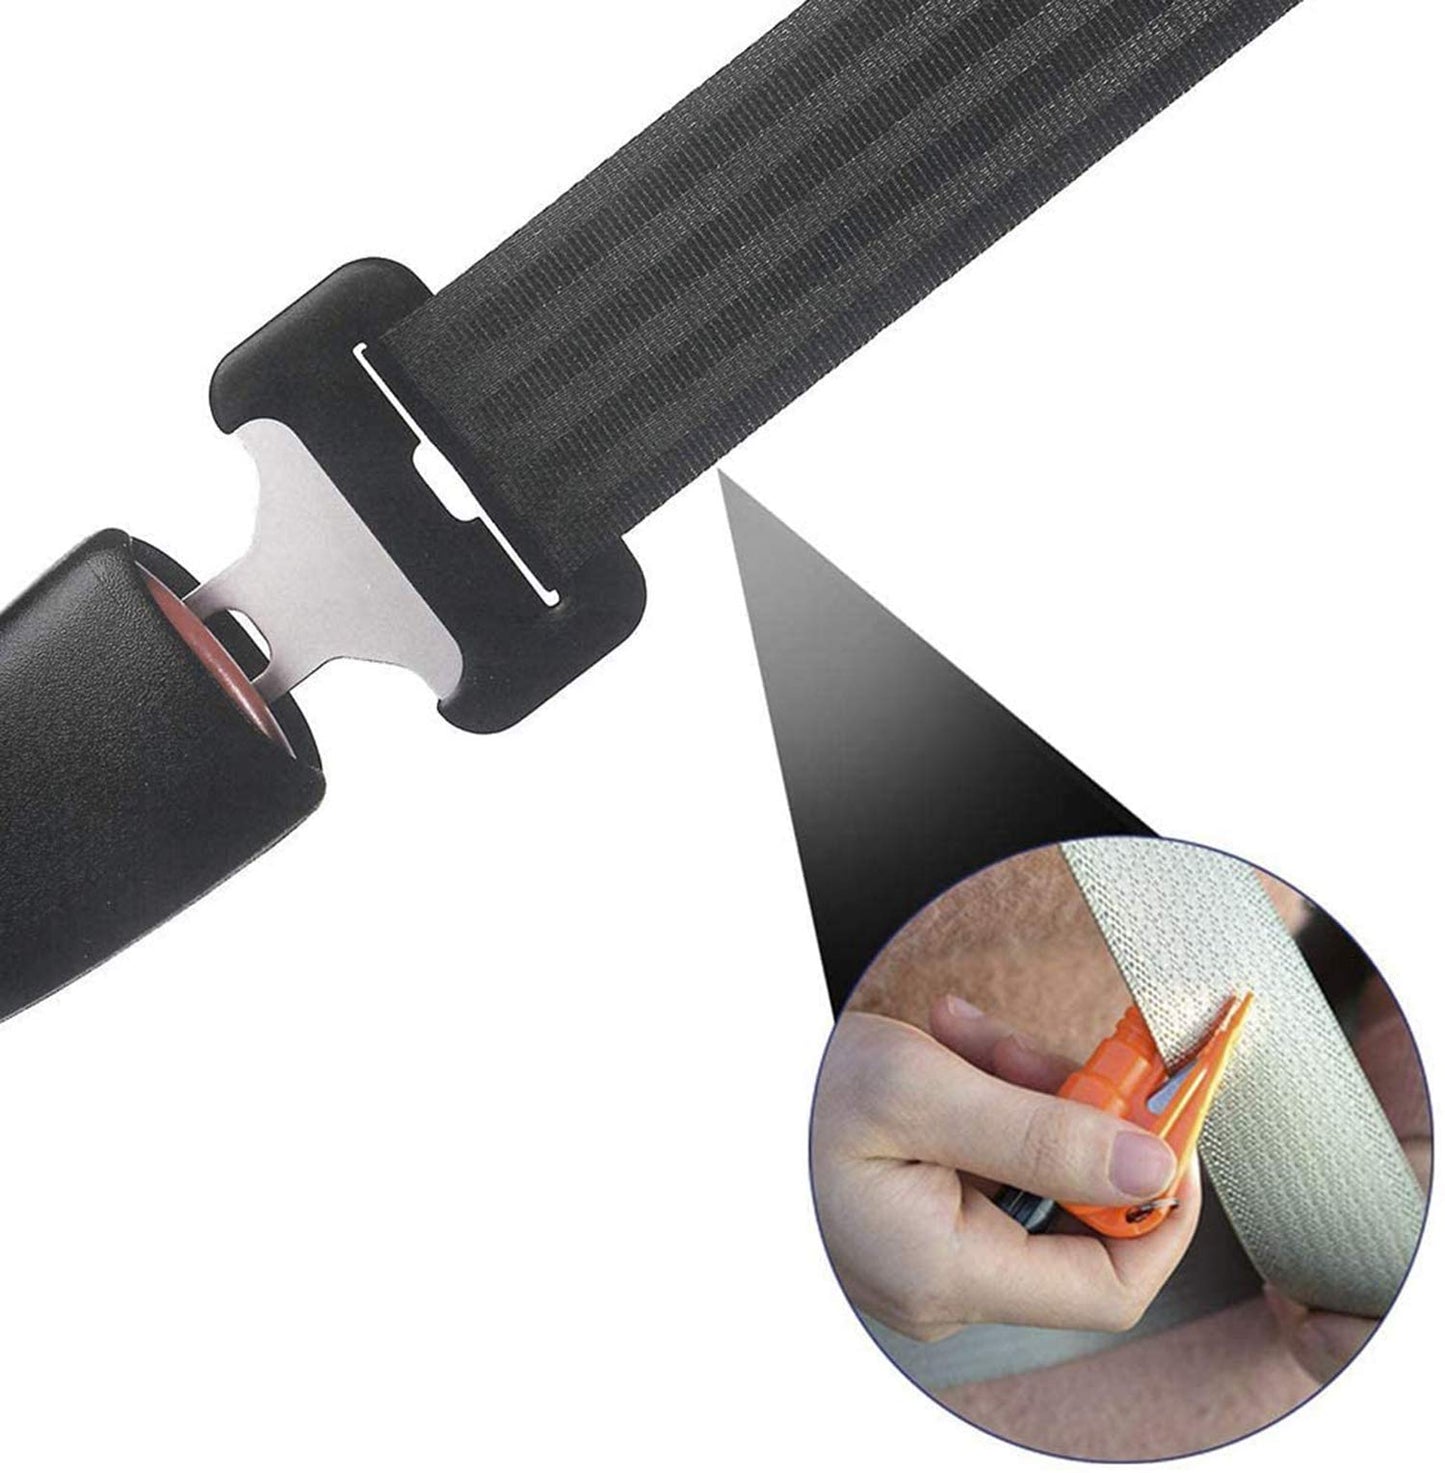 DELFINO Emergency Escape Tool with Key Chain, Safety Window Glass Hammer for Cars, Car Seat Belt Cutter Emergency Escape Tool Glass Break Hammer, Used for Escape (4 Pcs)